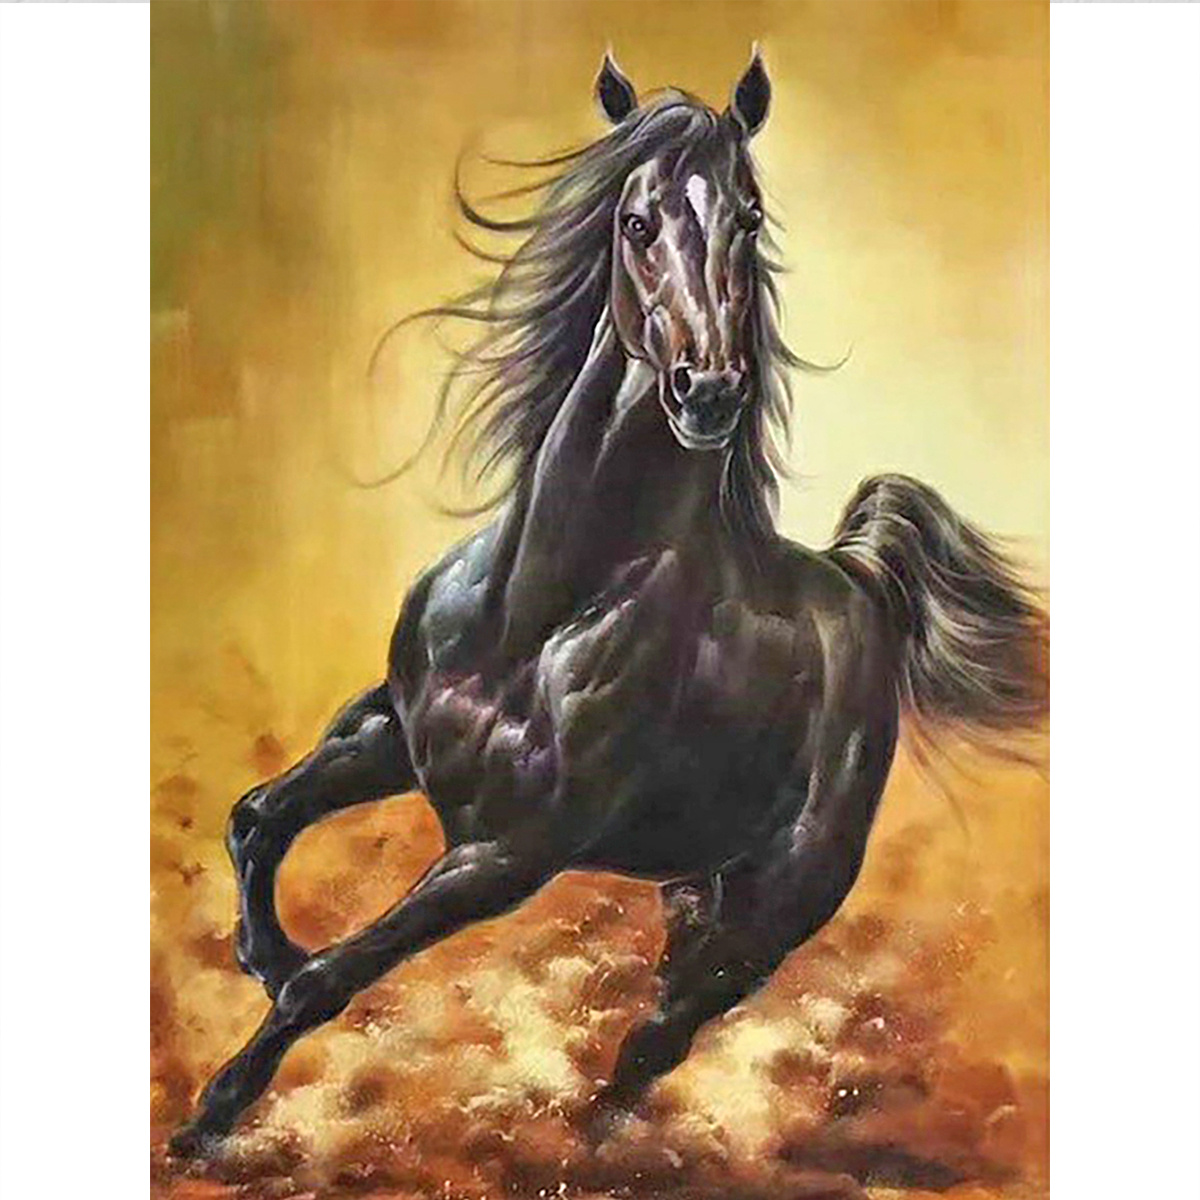 Noche Horse Diamond Painting Horse Full Drill Diamond Painting Kits,5d  Diamond Art,Gem Art for Adults Wall Home Decor 12x18 inch